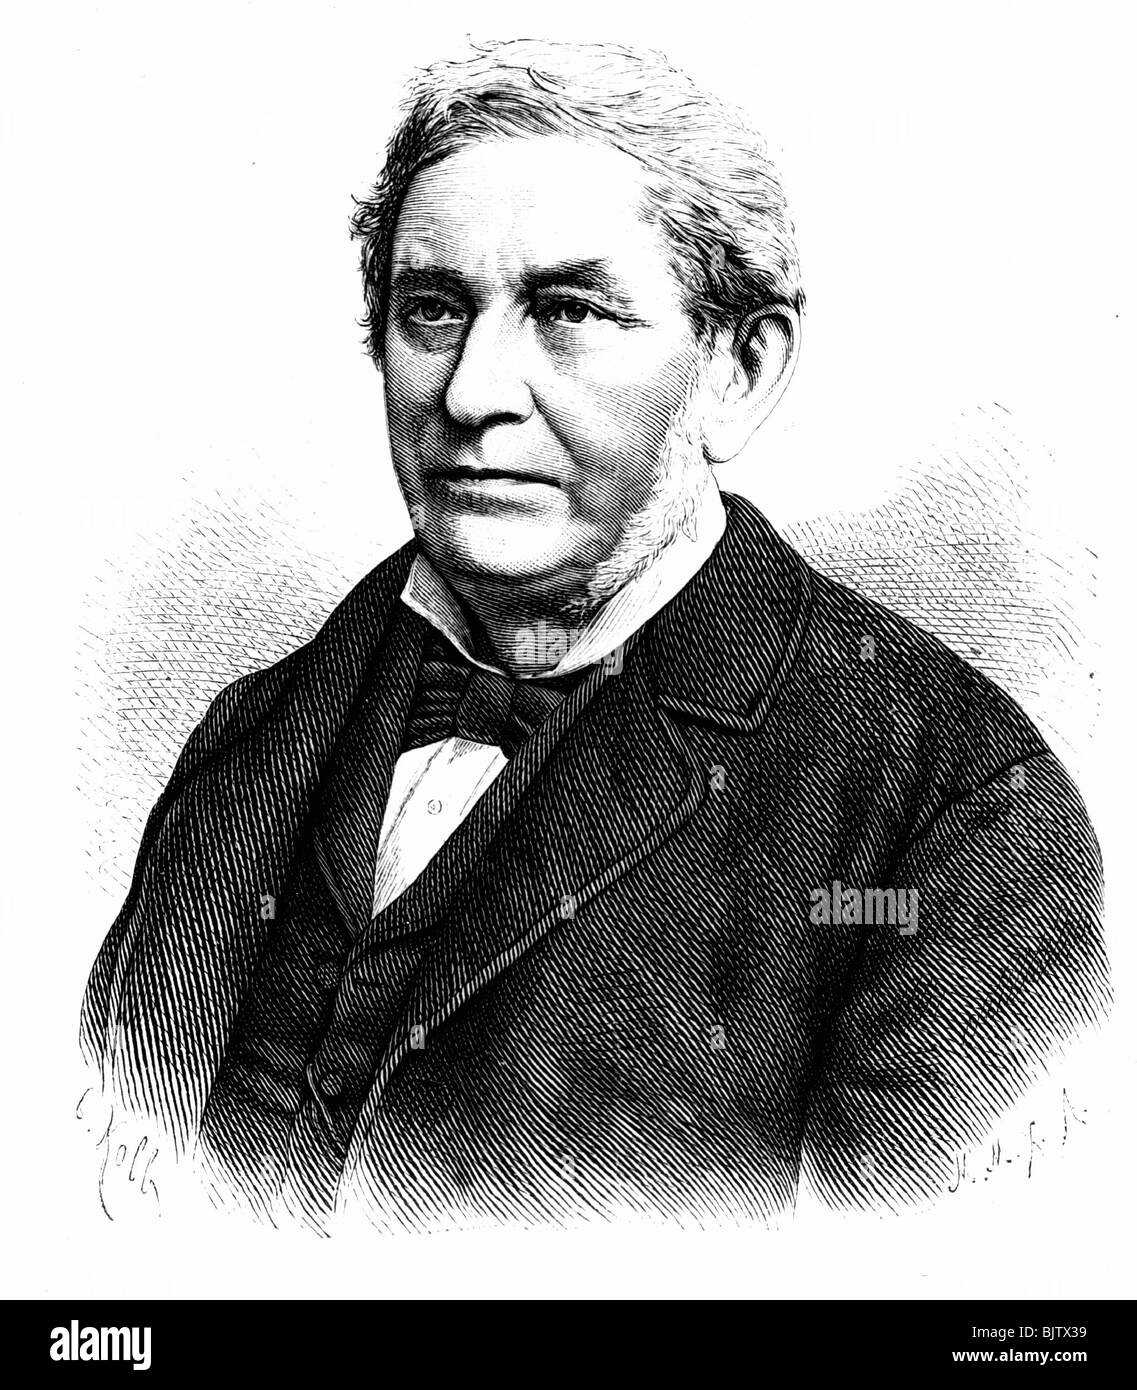 Bunsen, Robert Wilhelm, 30.3.1811 - 16.8.1899, German chemist, portrait, wood engraving after drawing by C. Kolb, after photo, 19th century, Stock Photo